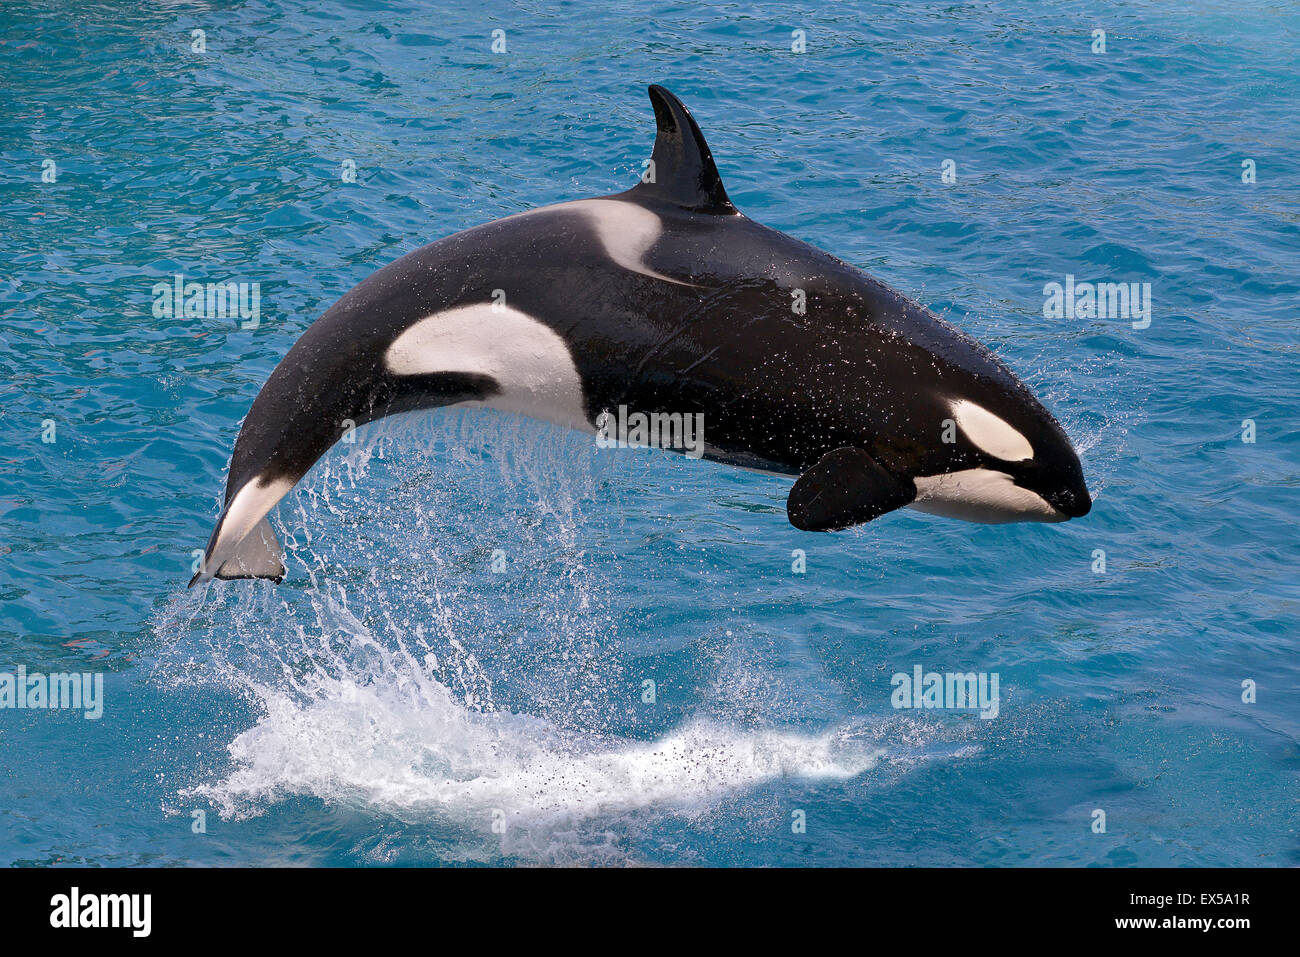 Killer whale jumping out of water Stock Photo